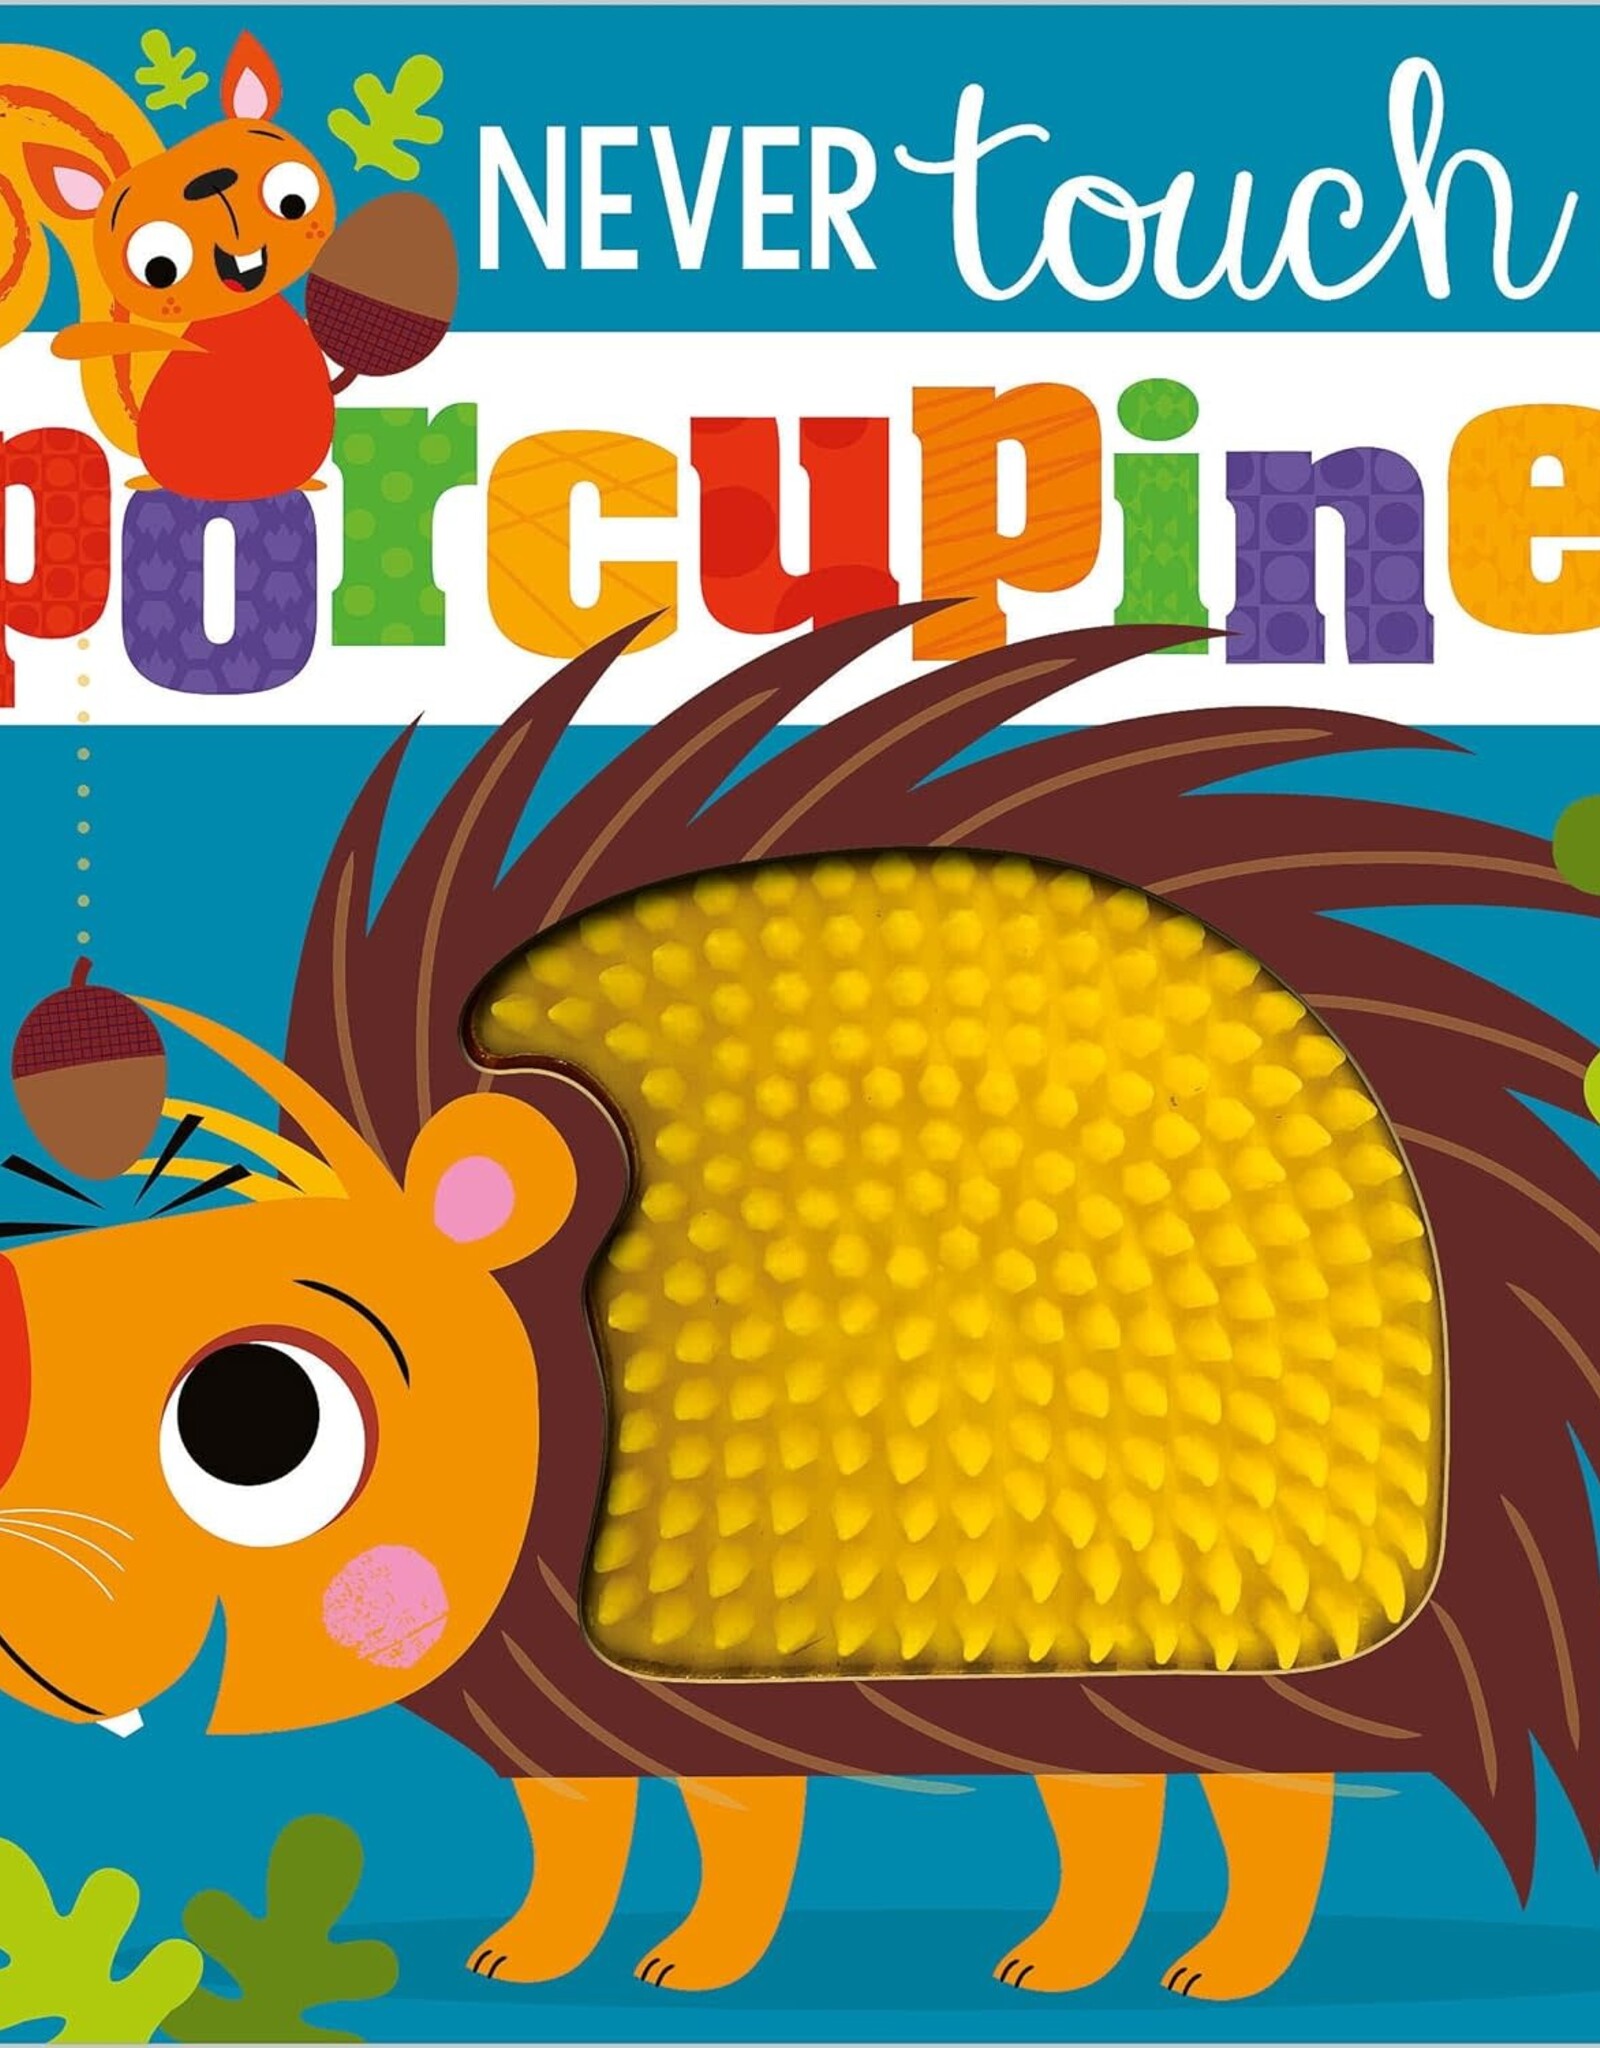 Never Touch A Porcupine!